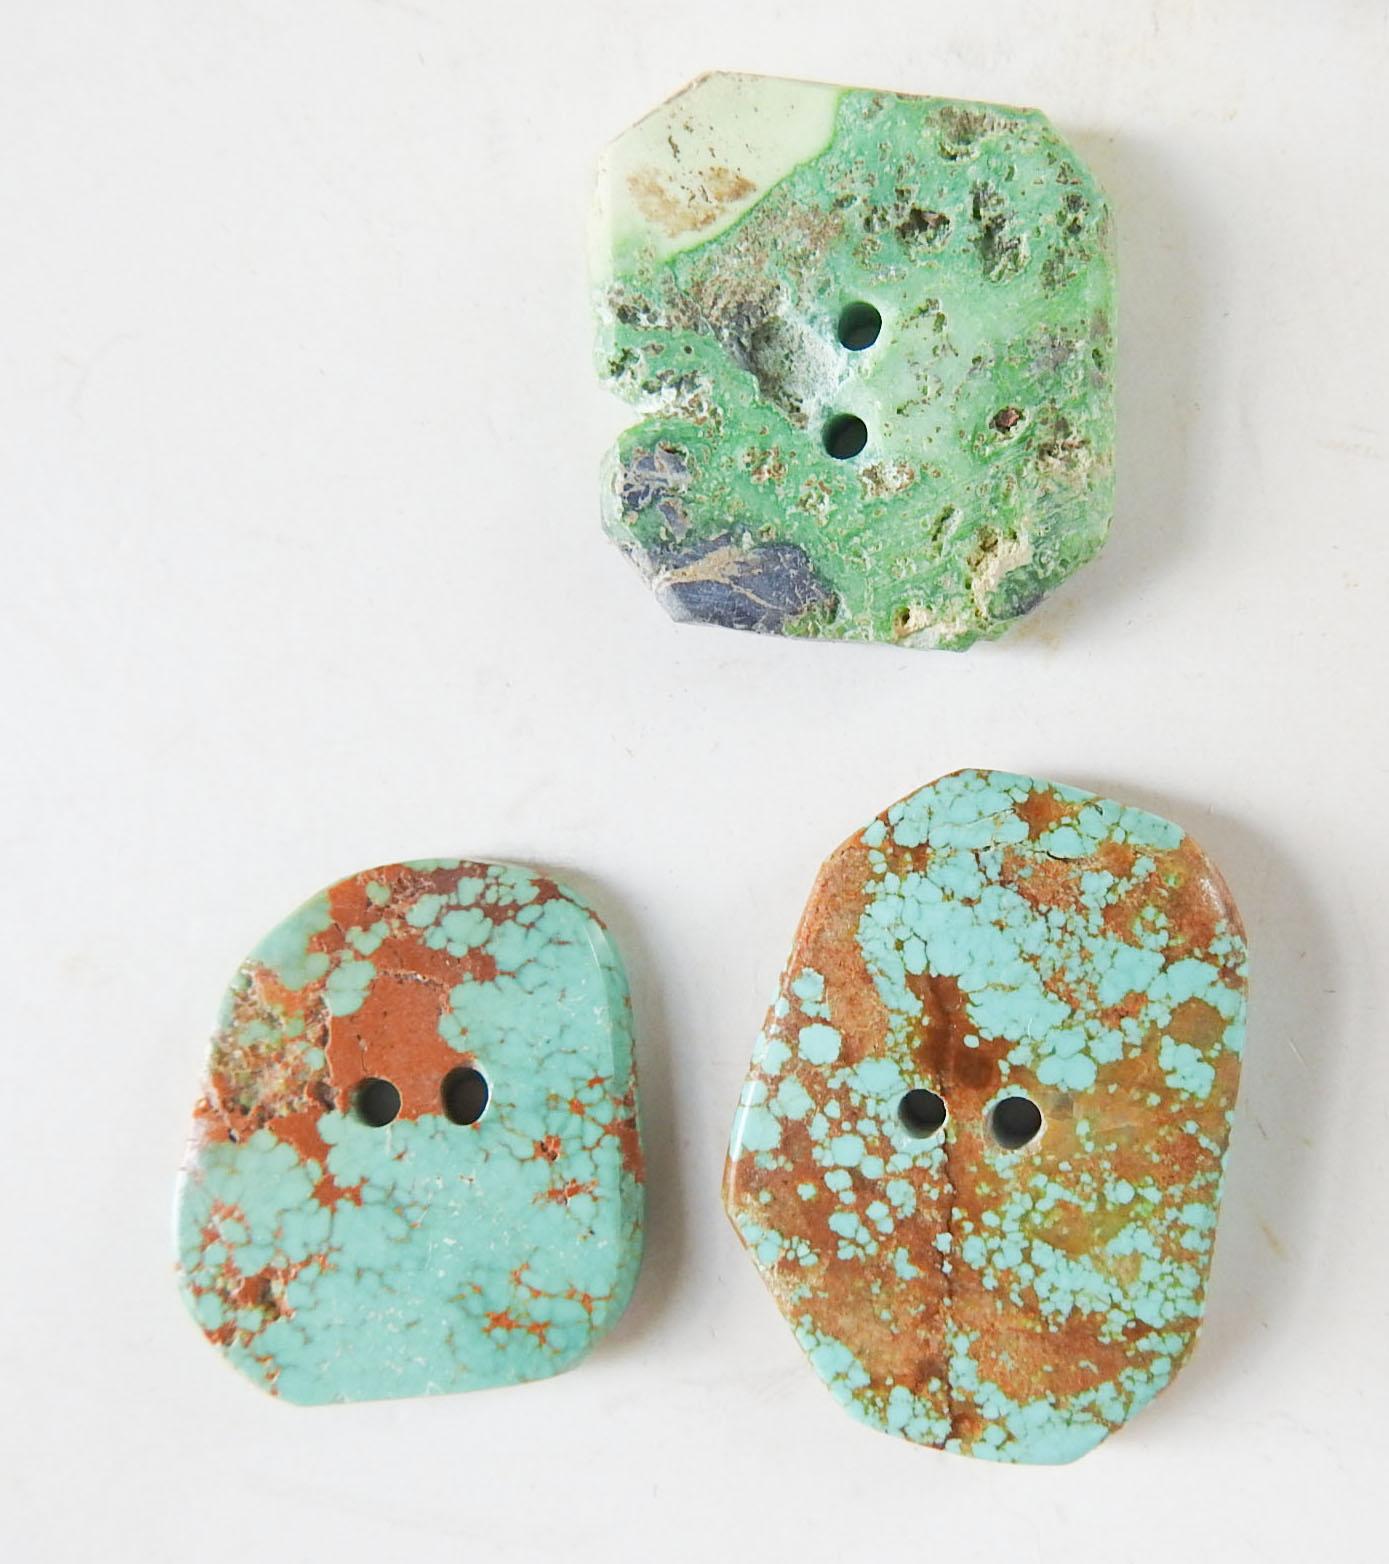 Vintage 1970's Collection of Turquoise Jasper Azurite Lapidary Buttons In Good Condition For Sale In Seguin, TX